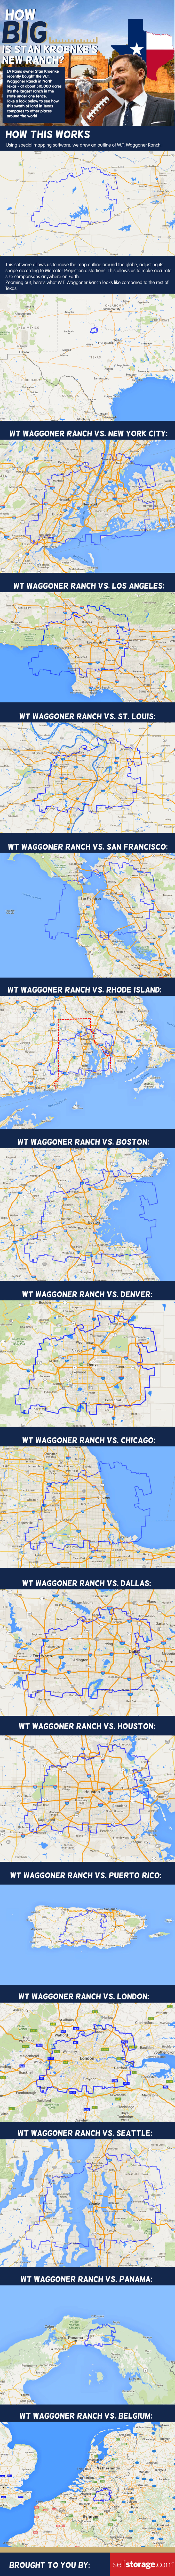 How Big Is The Waggoner Ranch?